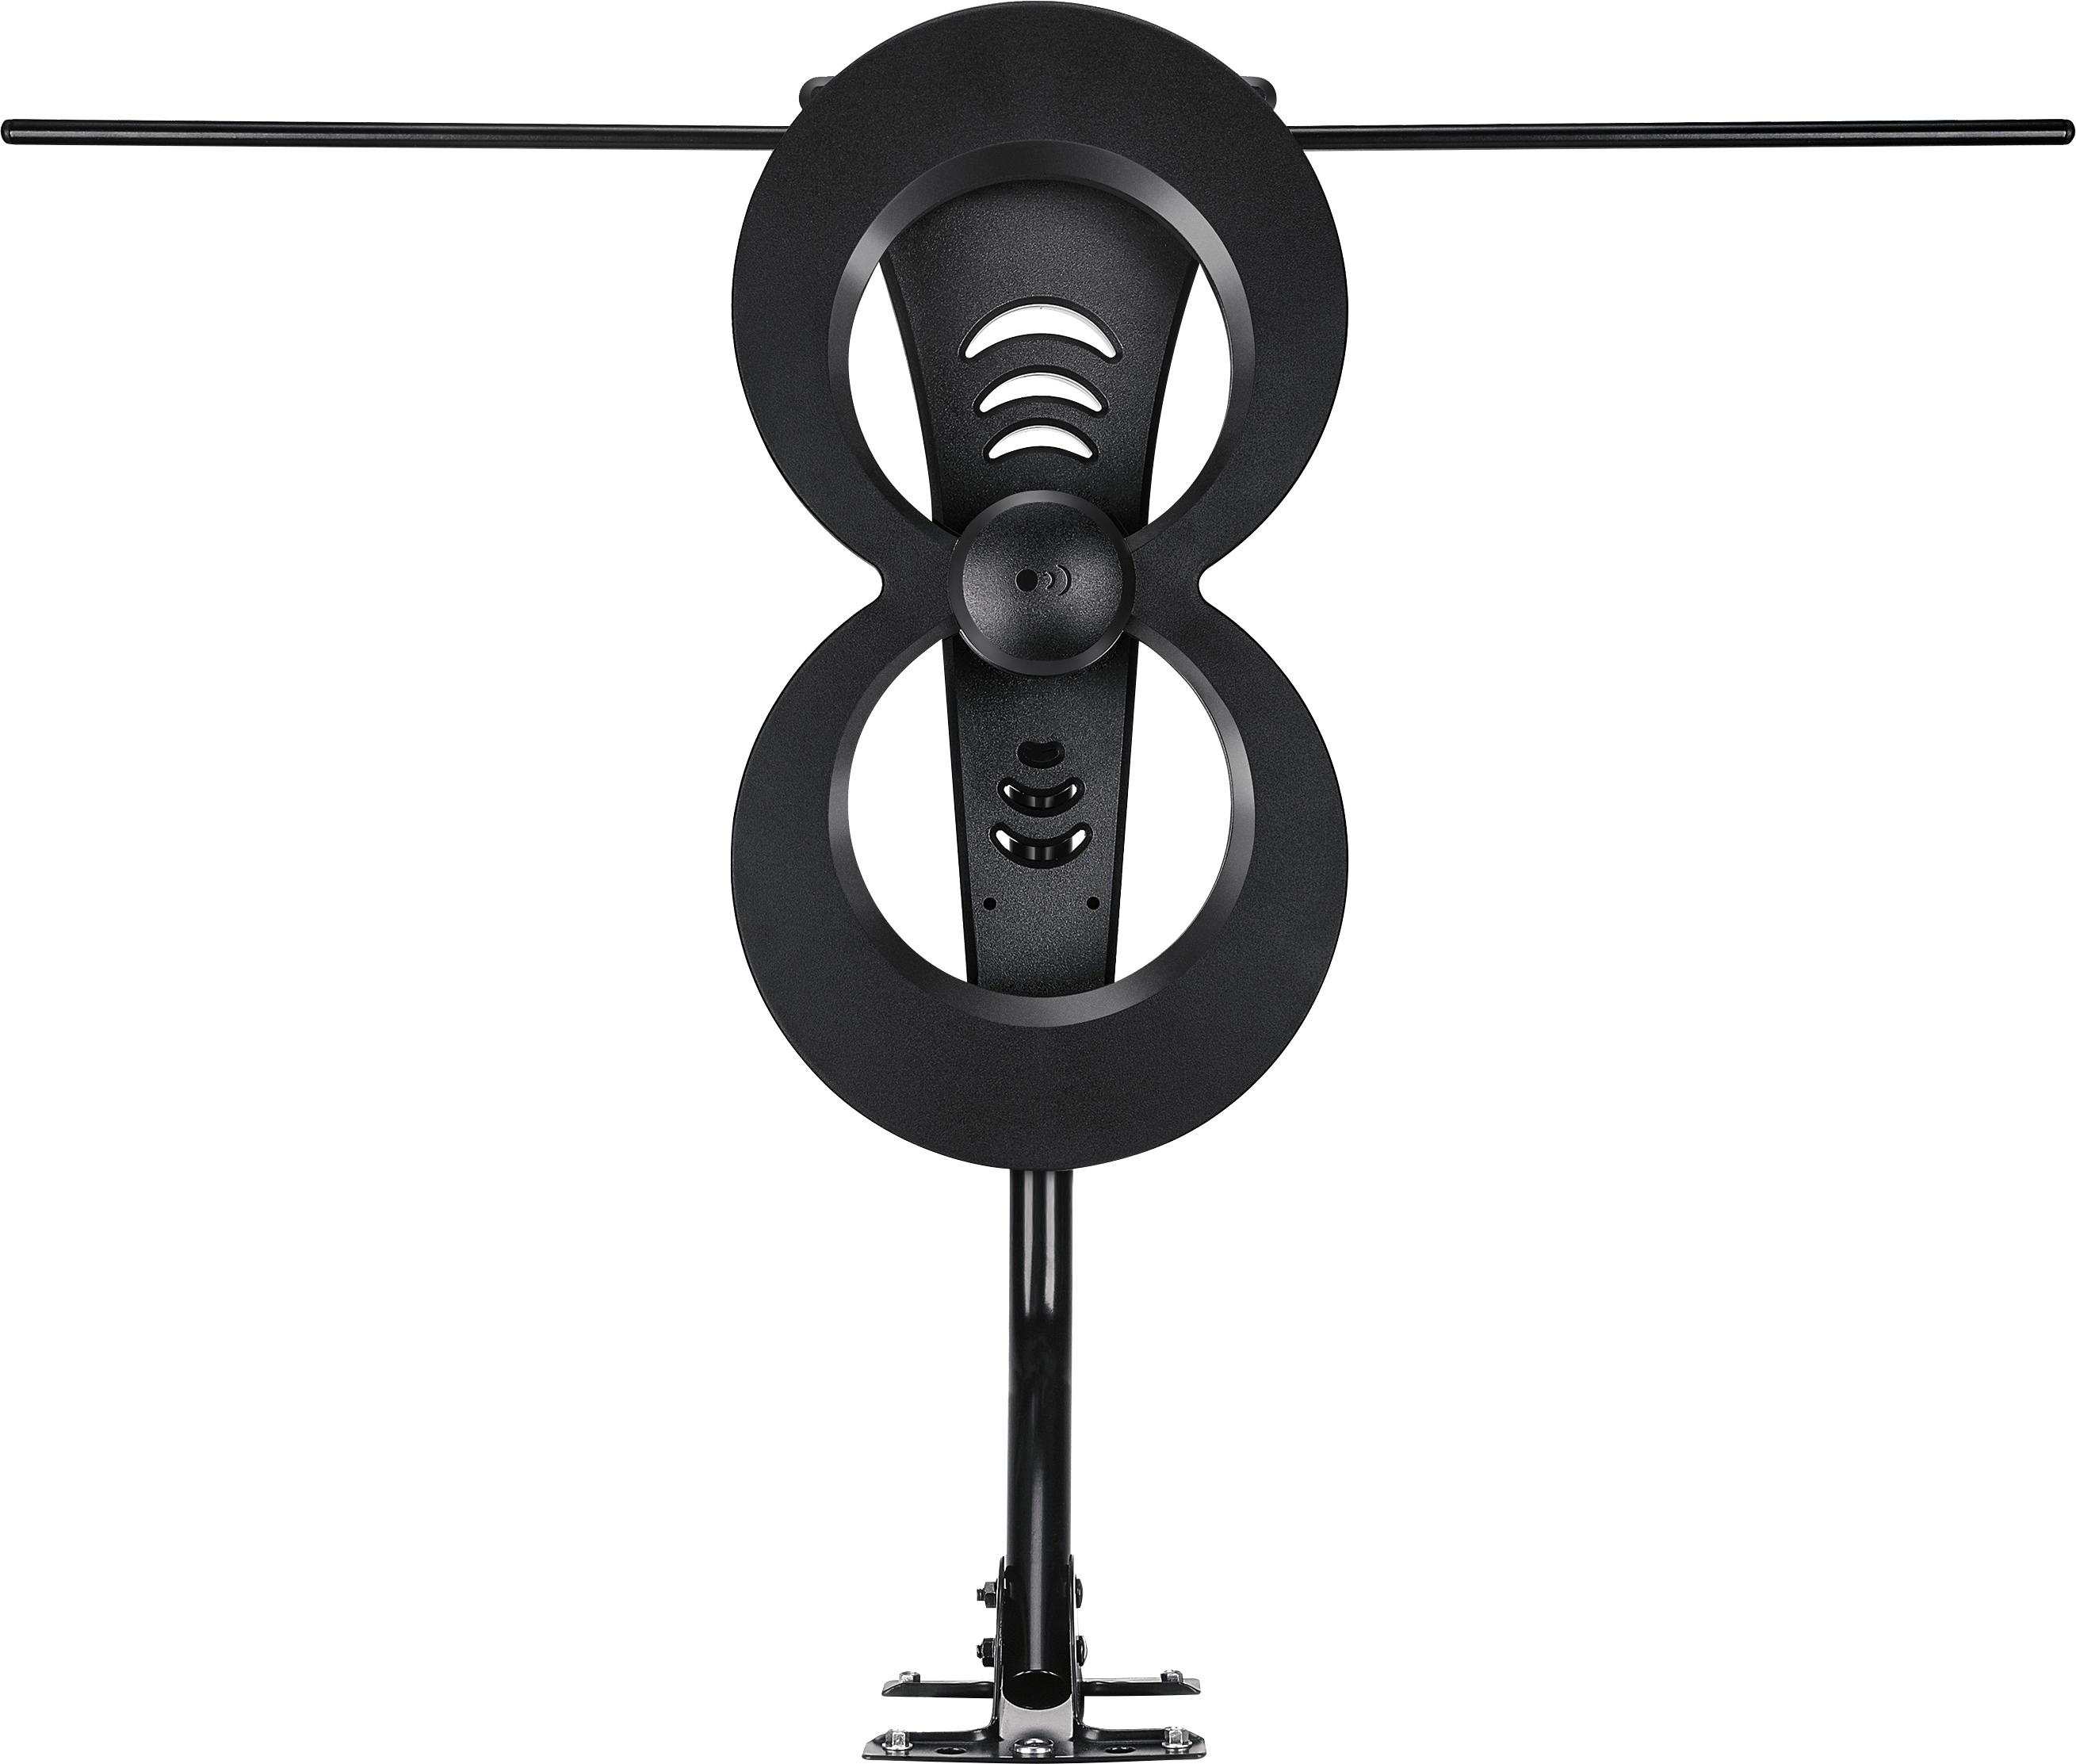 Antennas Direct - ClearStream 2MAX Indoor/Outdoor HDTV Antenna - Black was $99.99 now $79.99 (20.0% off)